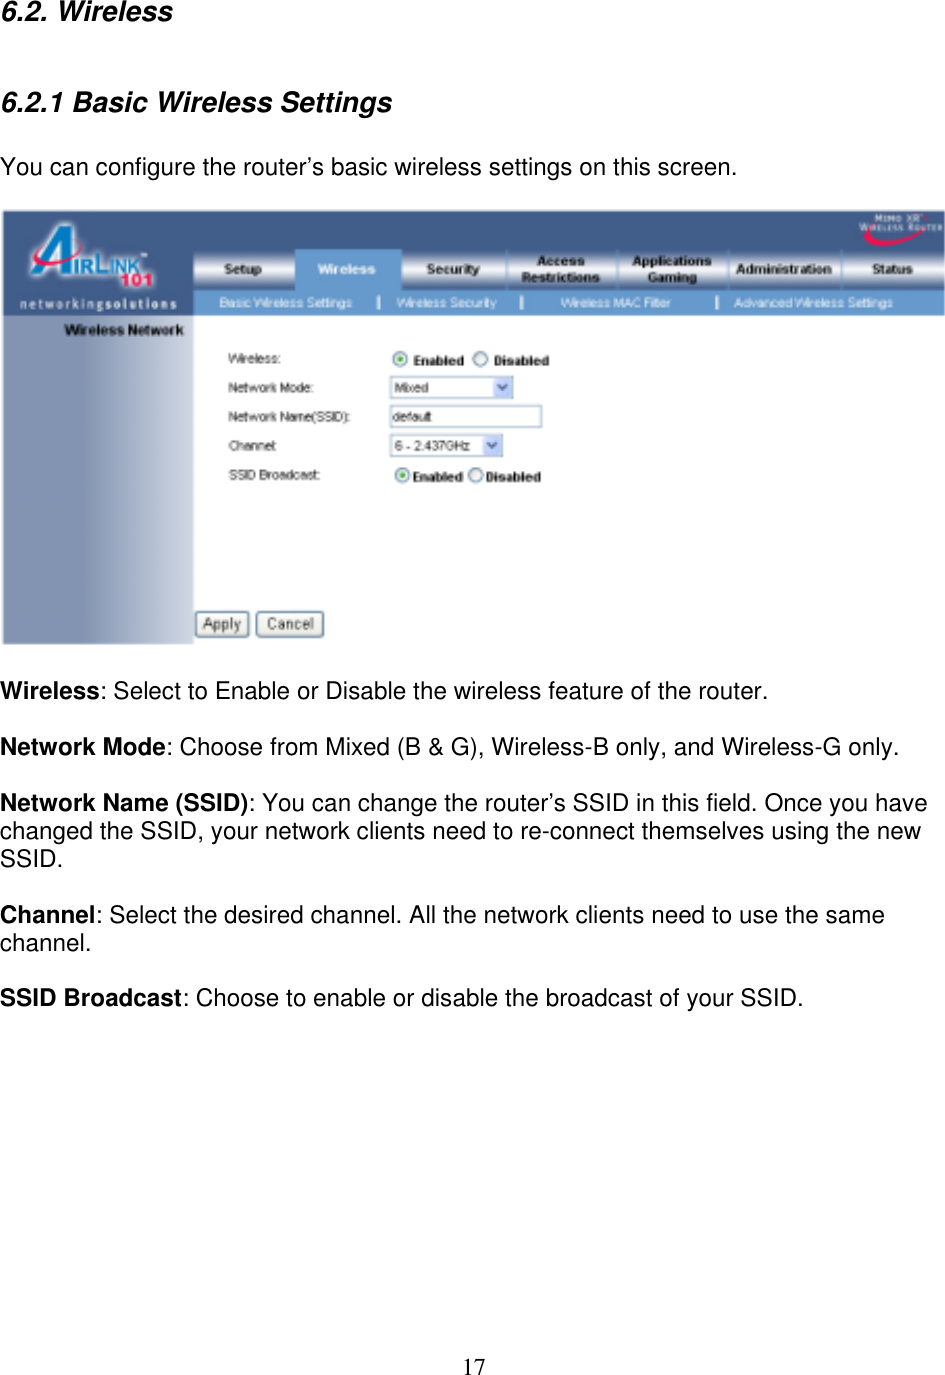 17 6.2. Wireless  6.2.1 Basic Wireless Settings  You can configure the router’s basic wireless settings on this screen.    Wireless: Select to Enable or Disable the wireless feature of the router.  Network Mode: Choose from Mixed (B &amp; G), Wireless-B only, and Wireless-G only.  Network Name (SSID): You can change the router’s SSID in this field. Once you have changed the SSID, your network clients need to re-connect themselves using the new SSID.  Channel: Select the desired channel. All the network clients need to use the same channel.  SSID Broadcast: Choose to enable or disable the broadcast of your SSID.           